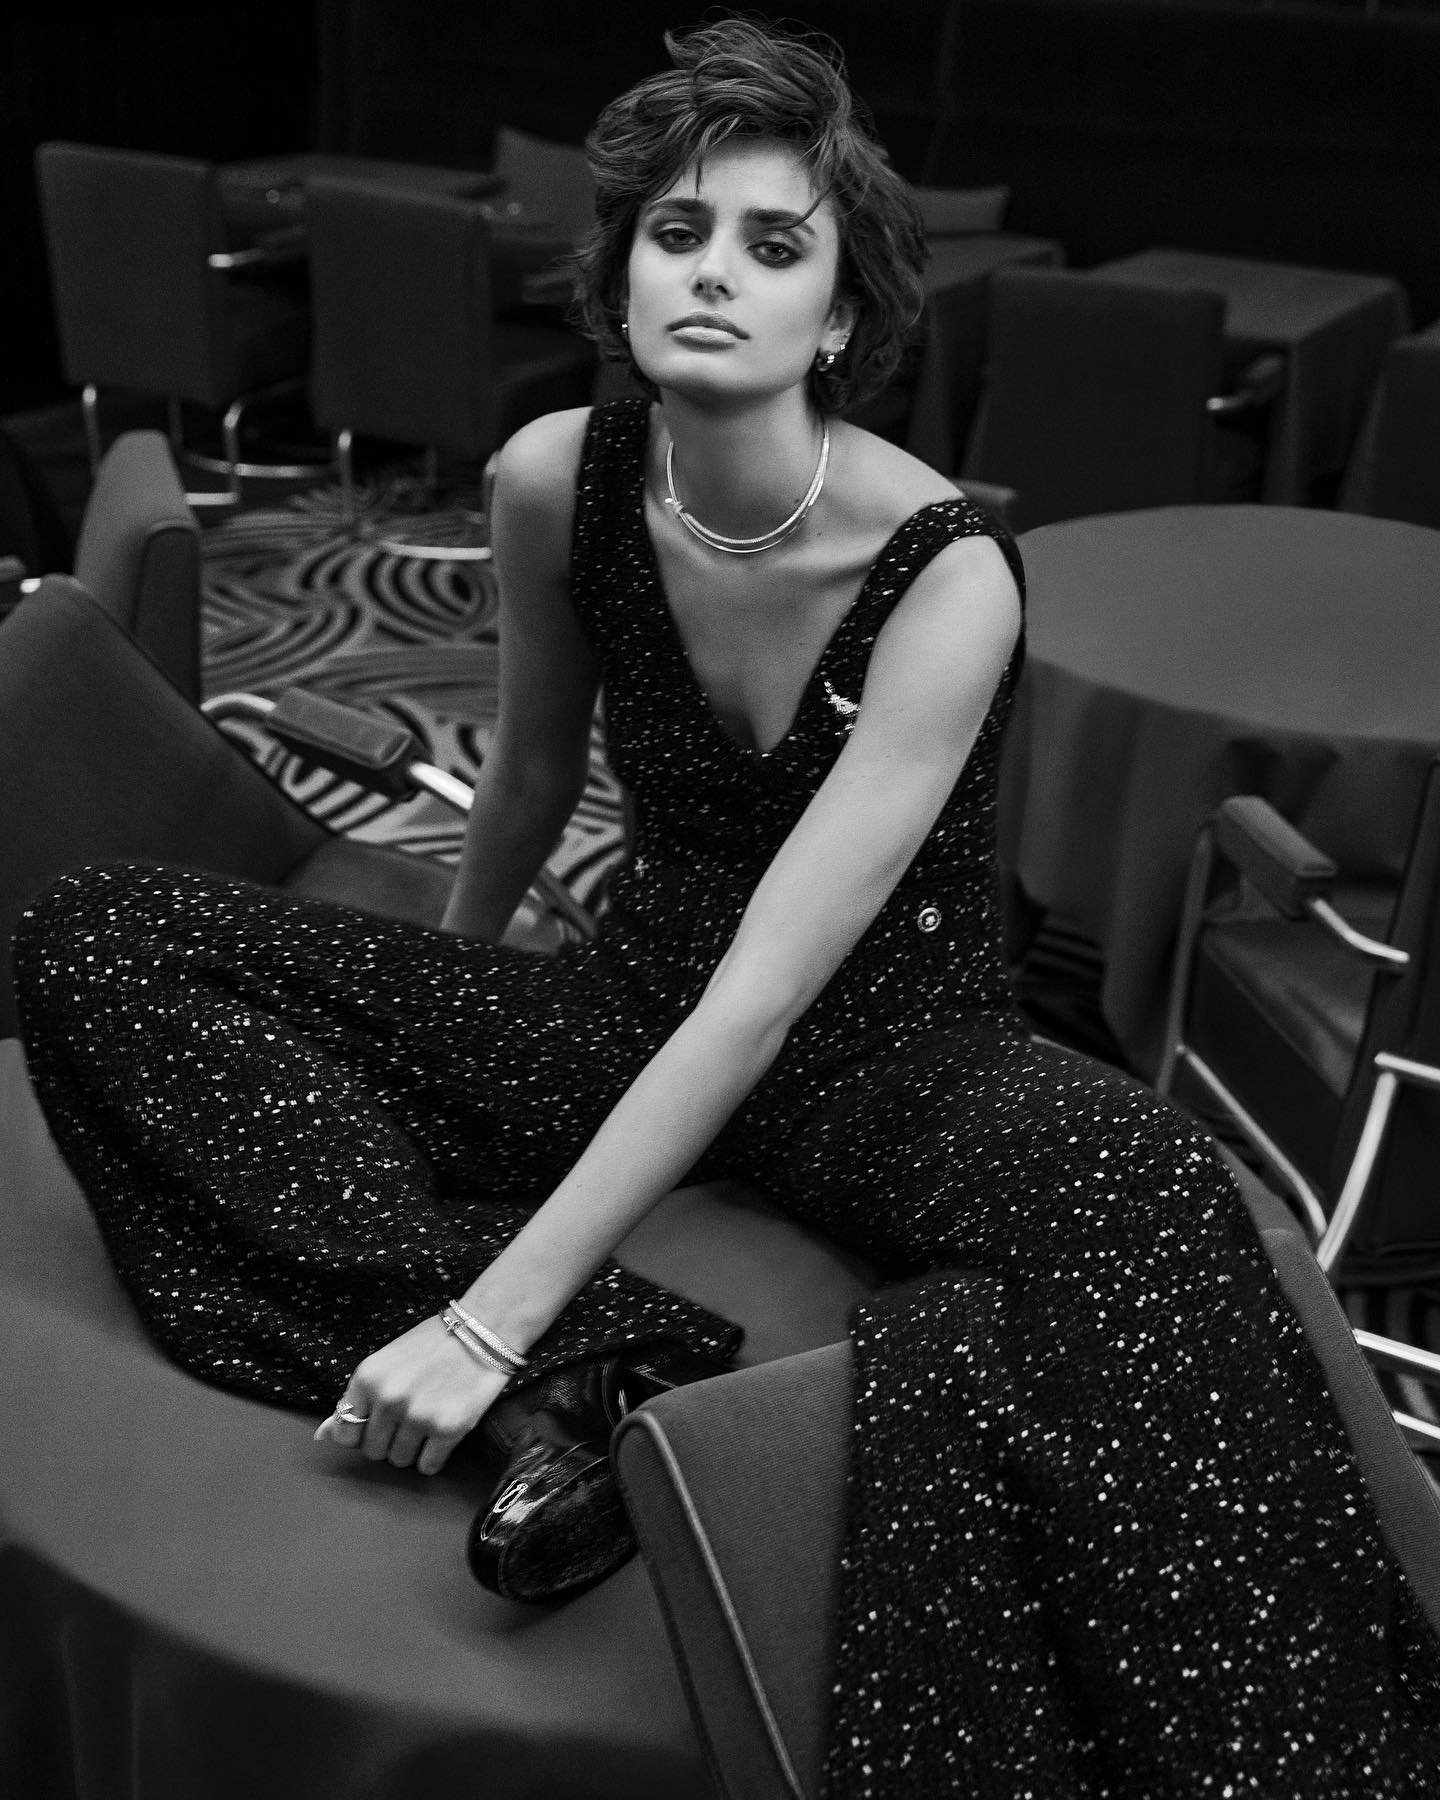 Taylor-Hill-by-Max-Papendieck-Vogue-Turkey-October-2023-6.jpg